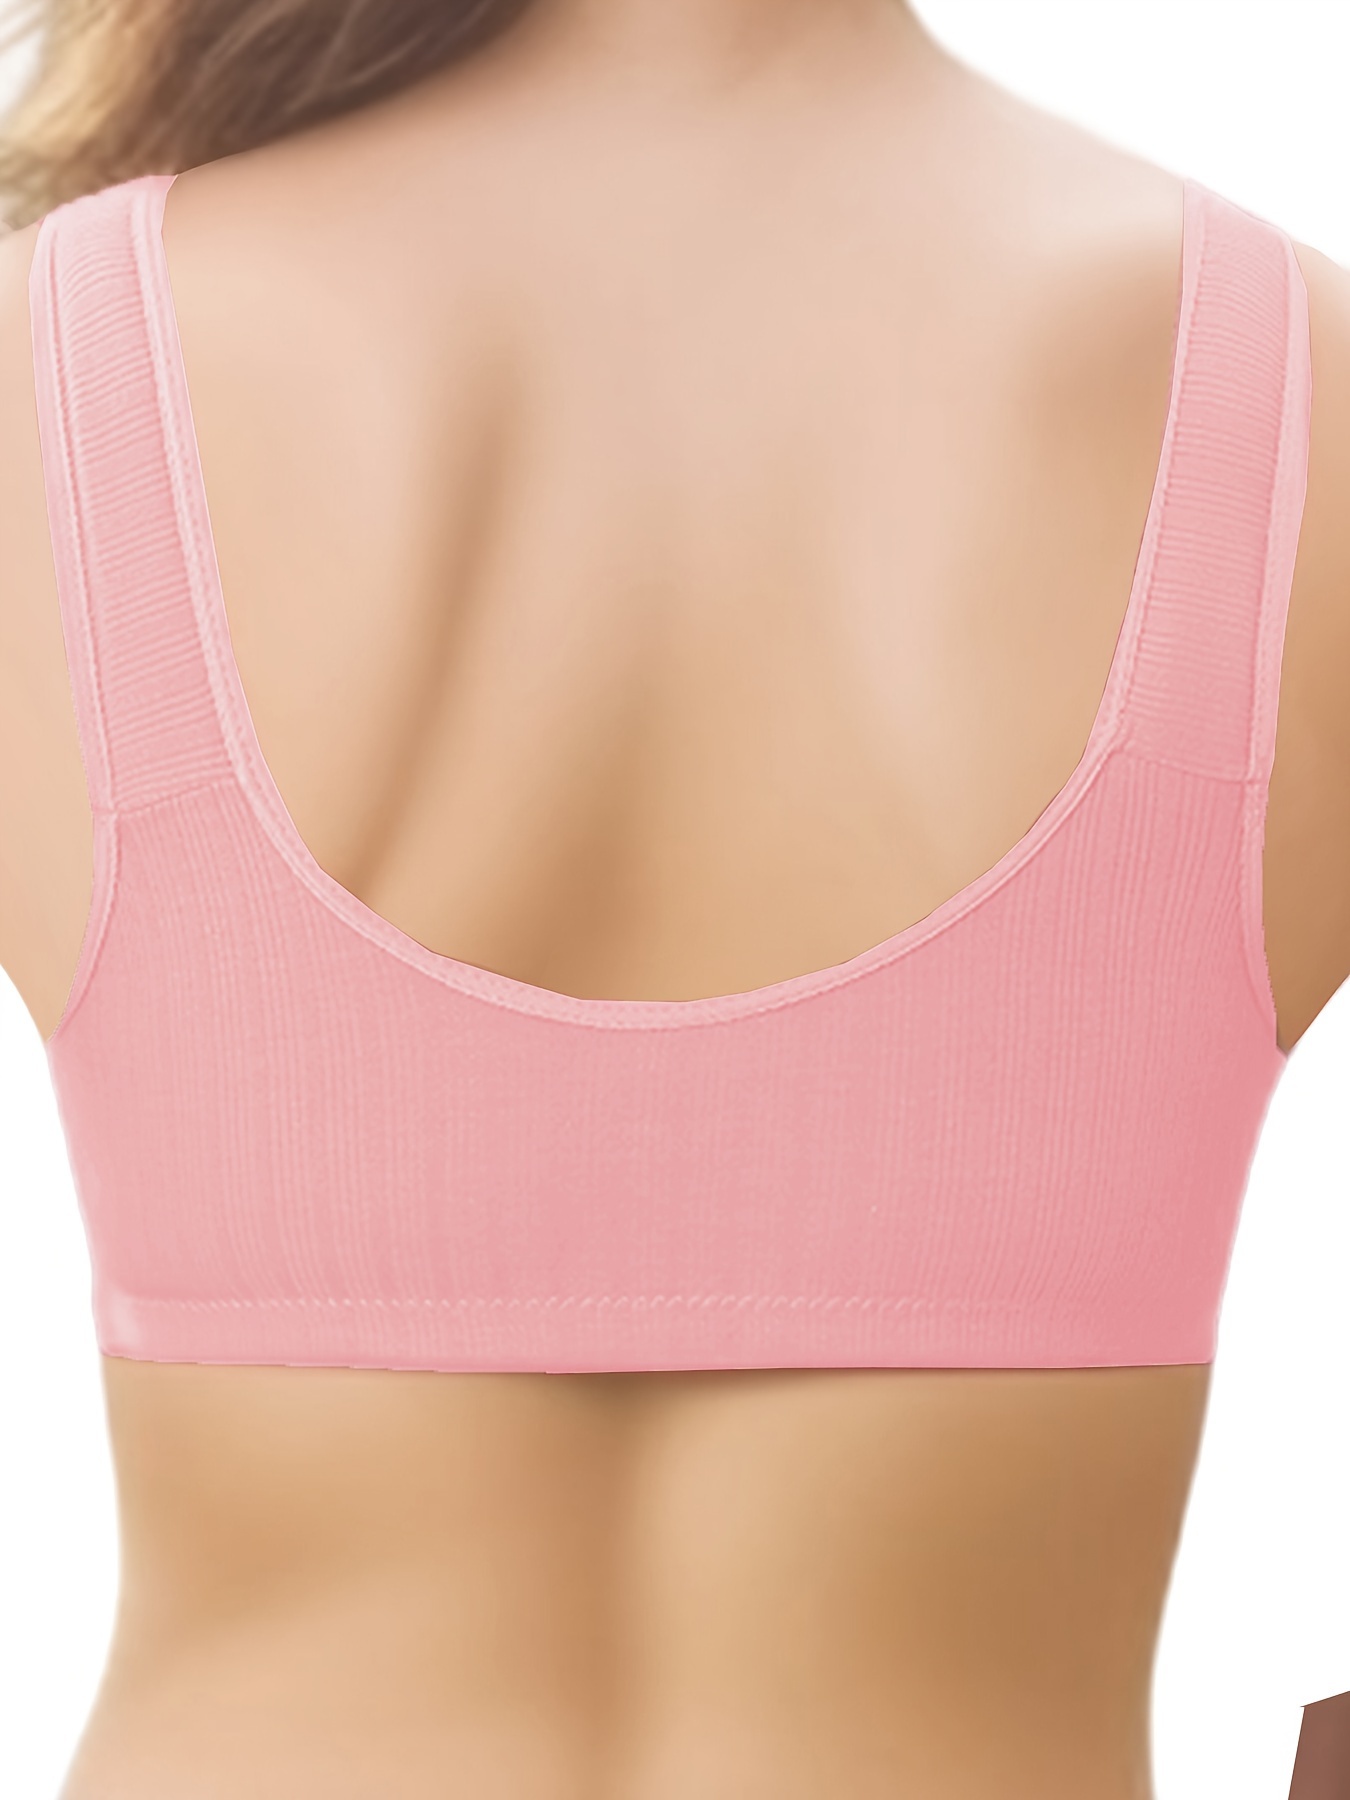 SHAPSHE Women's Front Closure Bras Wireless Post Surgery Sport Bras Back  Support Sports Bra Daily Comforts Shaper Brassiere Beige at  Women's  Clothing store